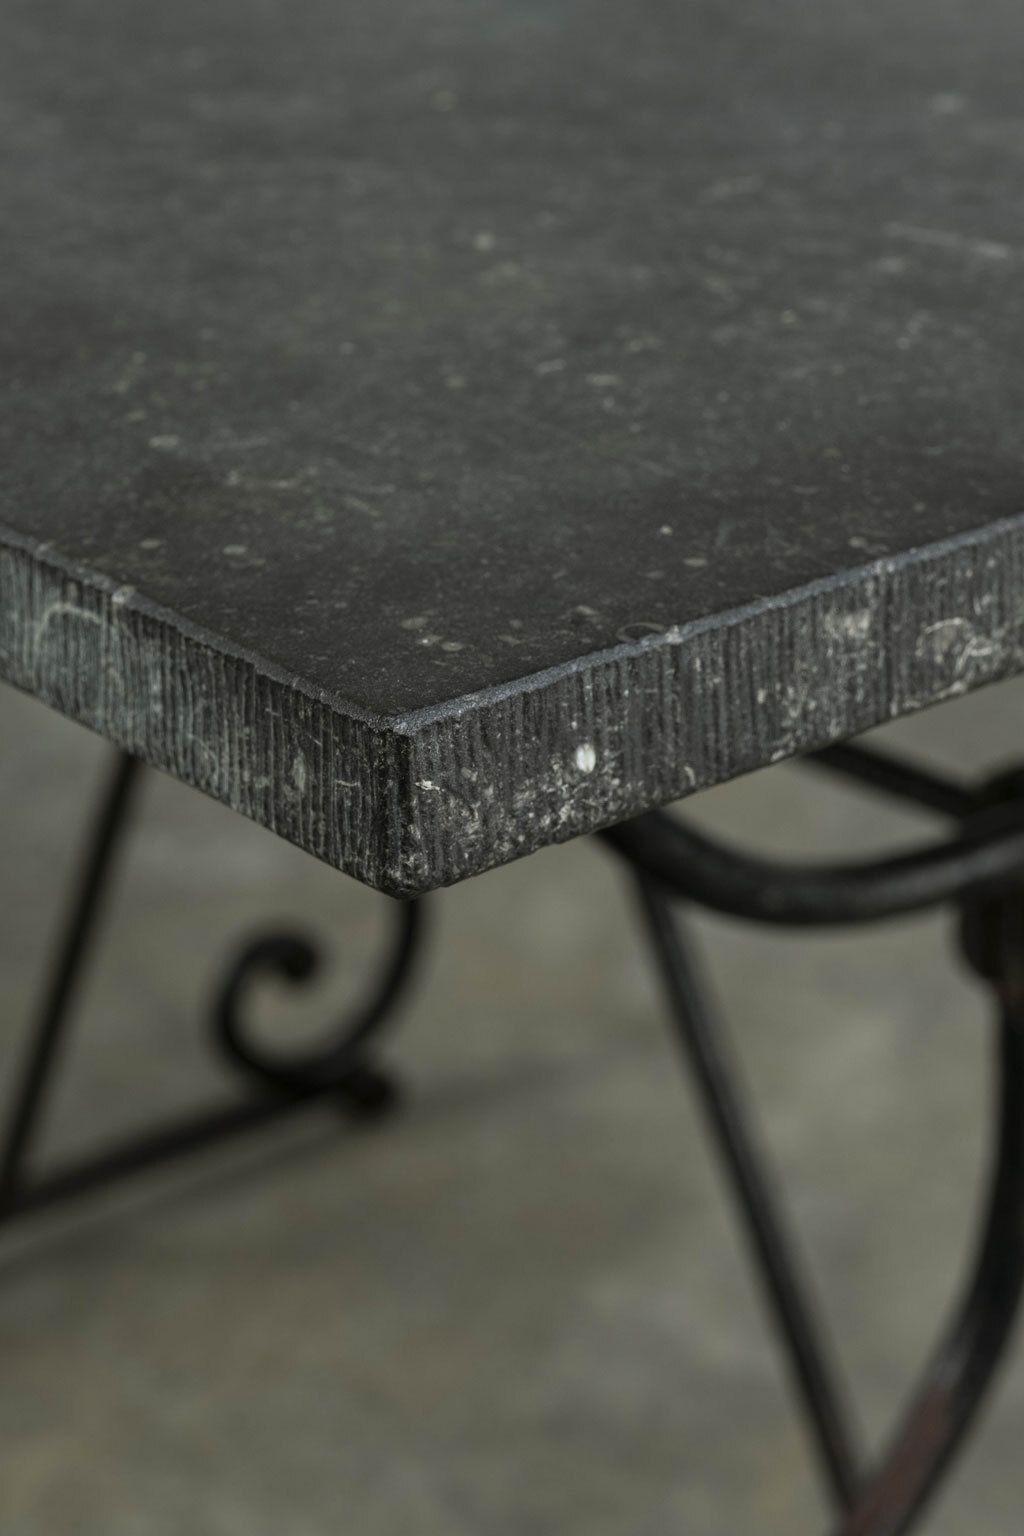 Grand-scale bluestone top iron base table circa 1880, France. Large rectangular bluestone top raised upon a 19th century forged-iron and brass scrolled-base. Maybe be used for indoor or outdoor dining, as a console table or as originally intended as